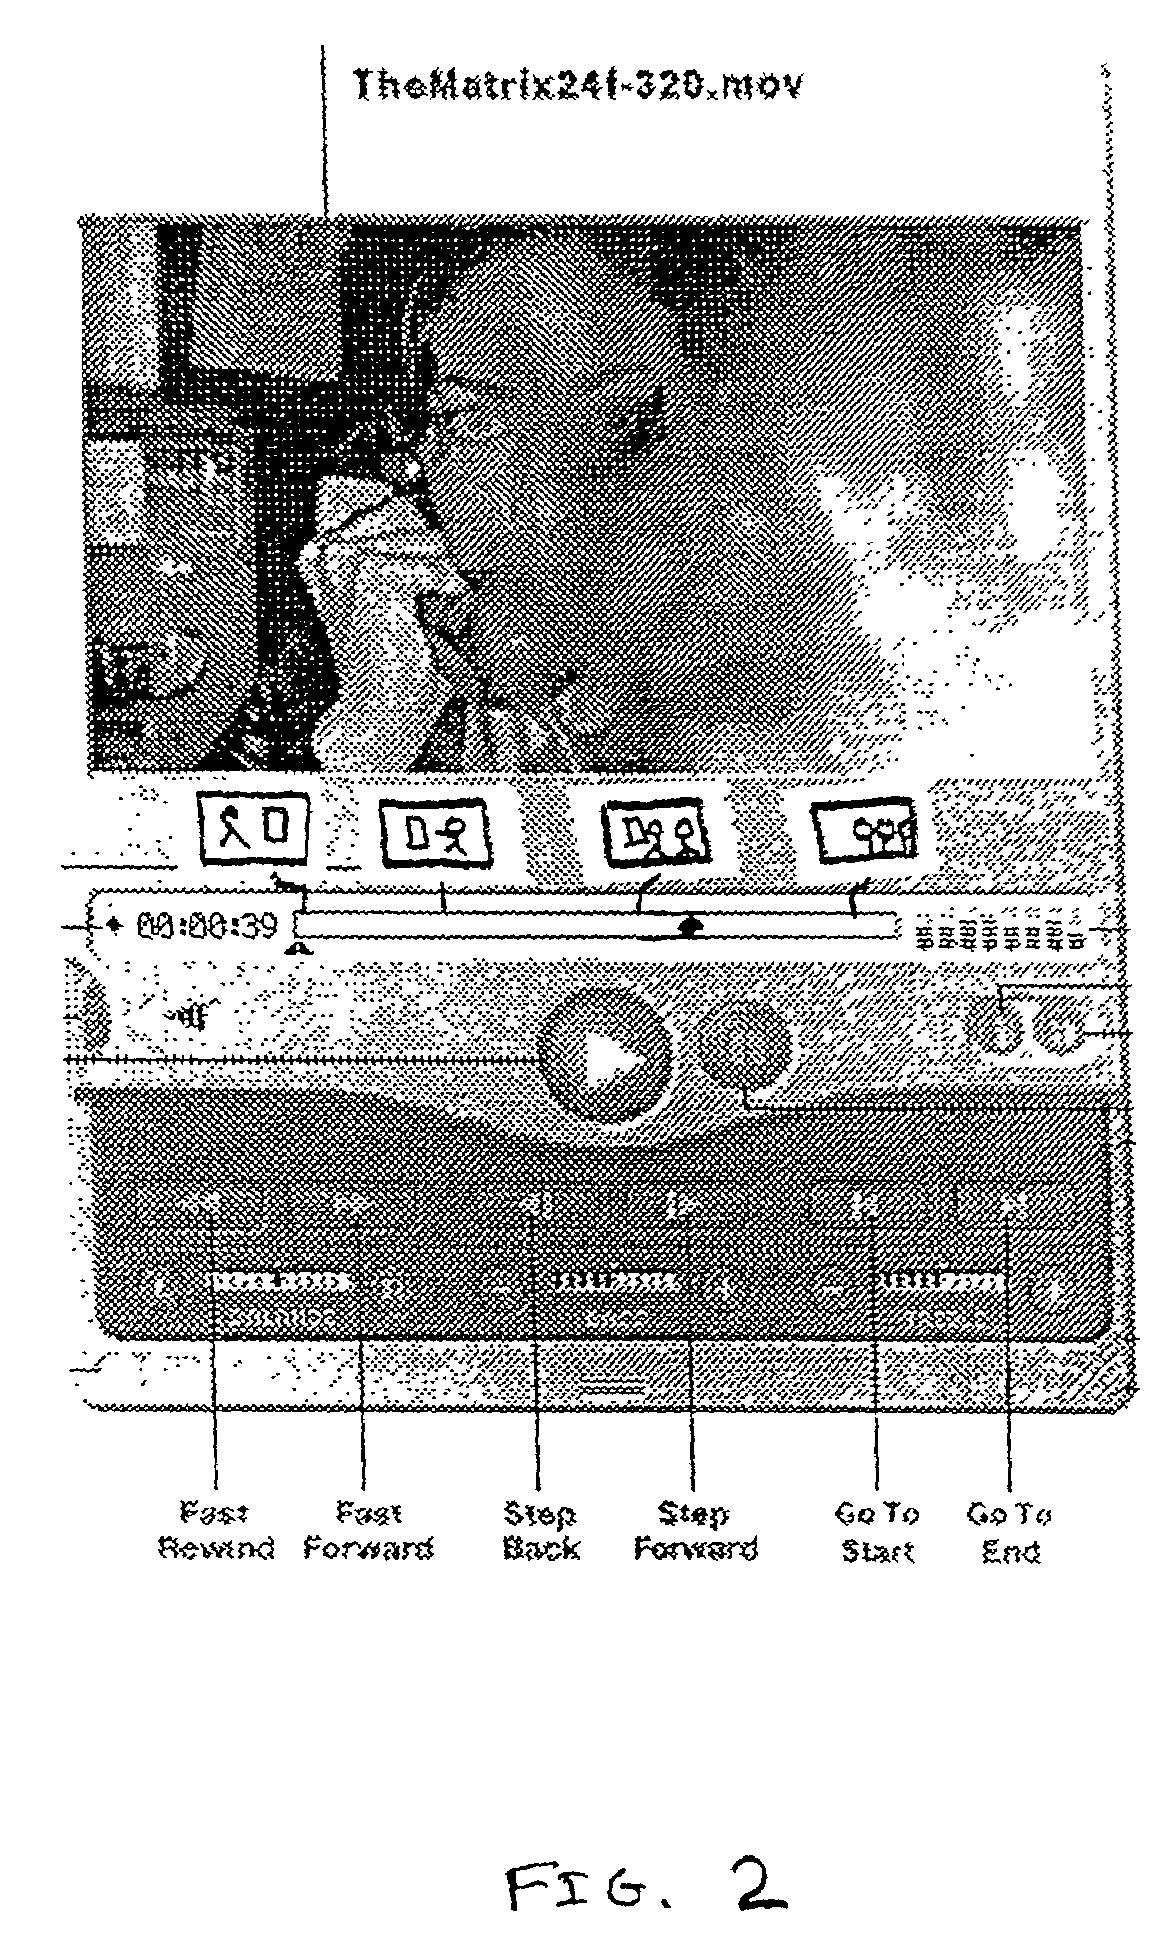 System and method for video navigation and client side indexing